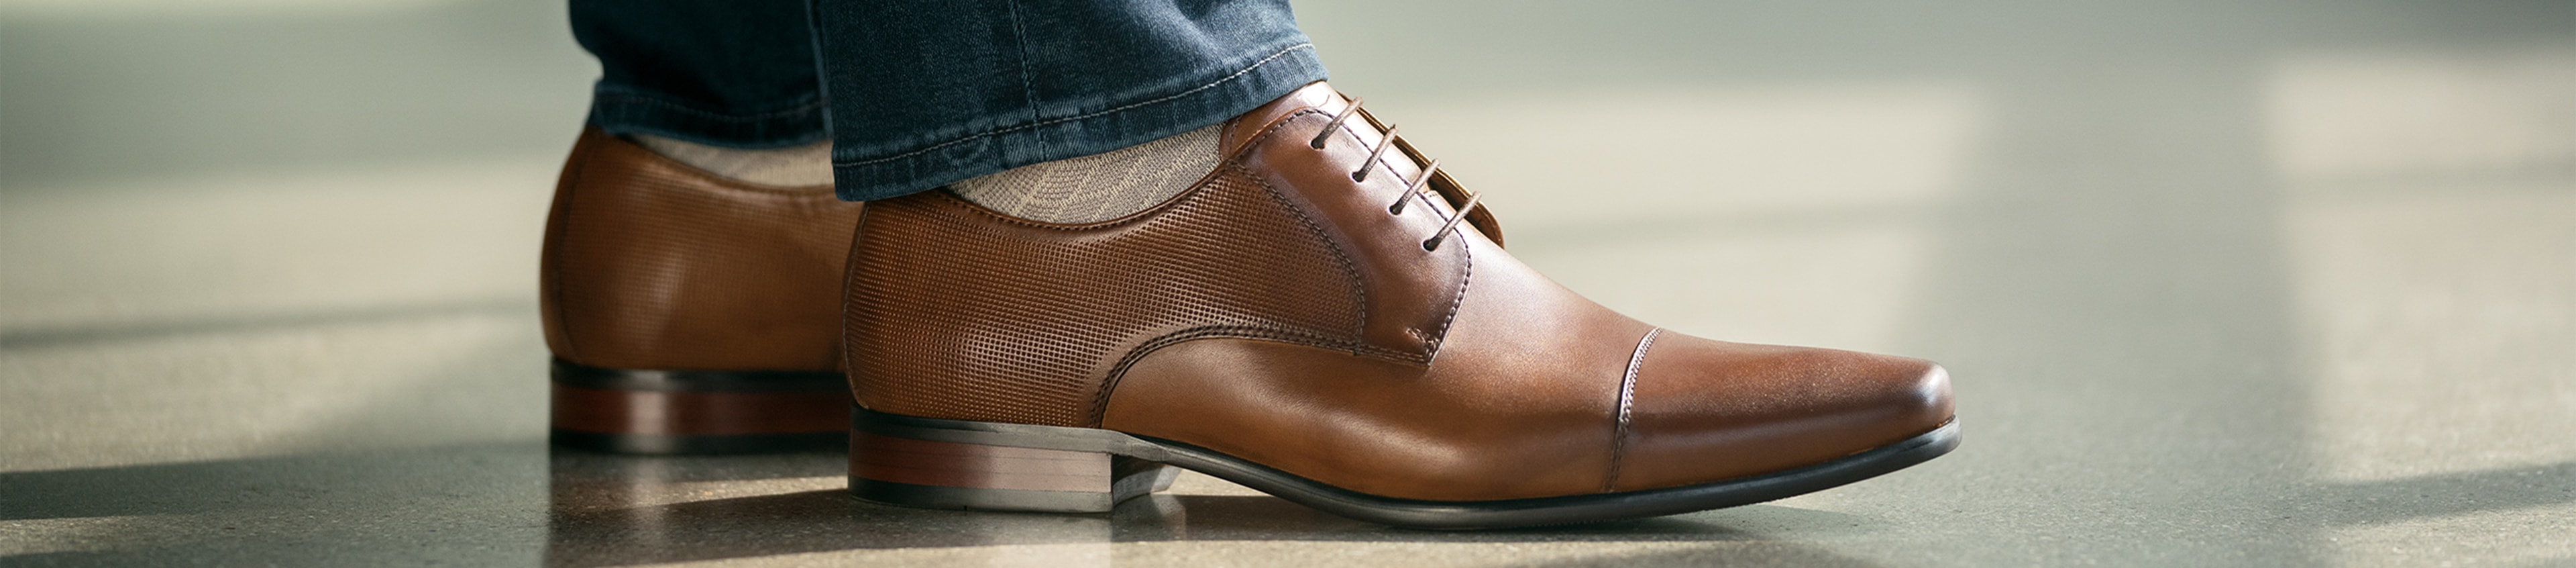 The featured shoe in this image is the Postino Cap Toe Oxford in Cognac.